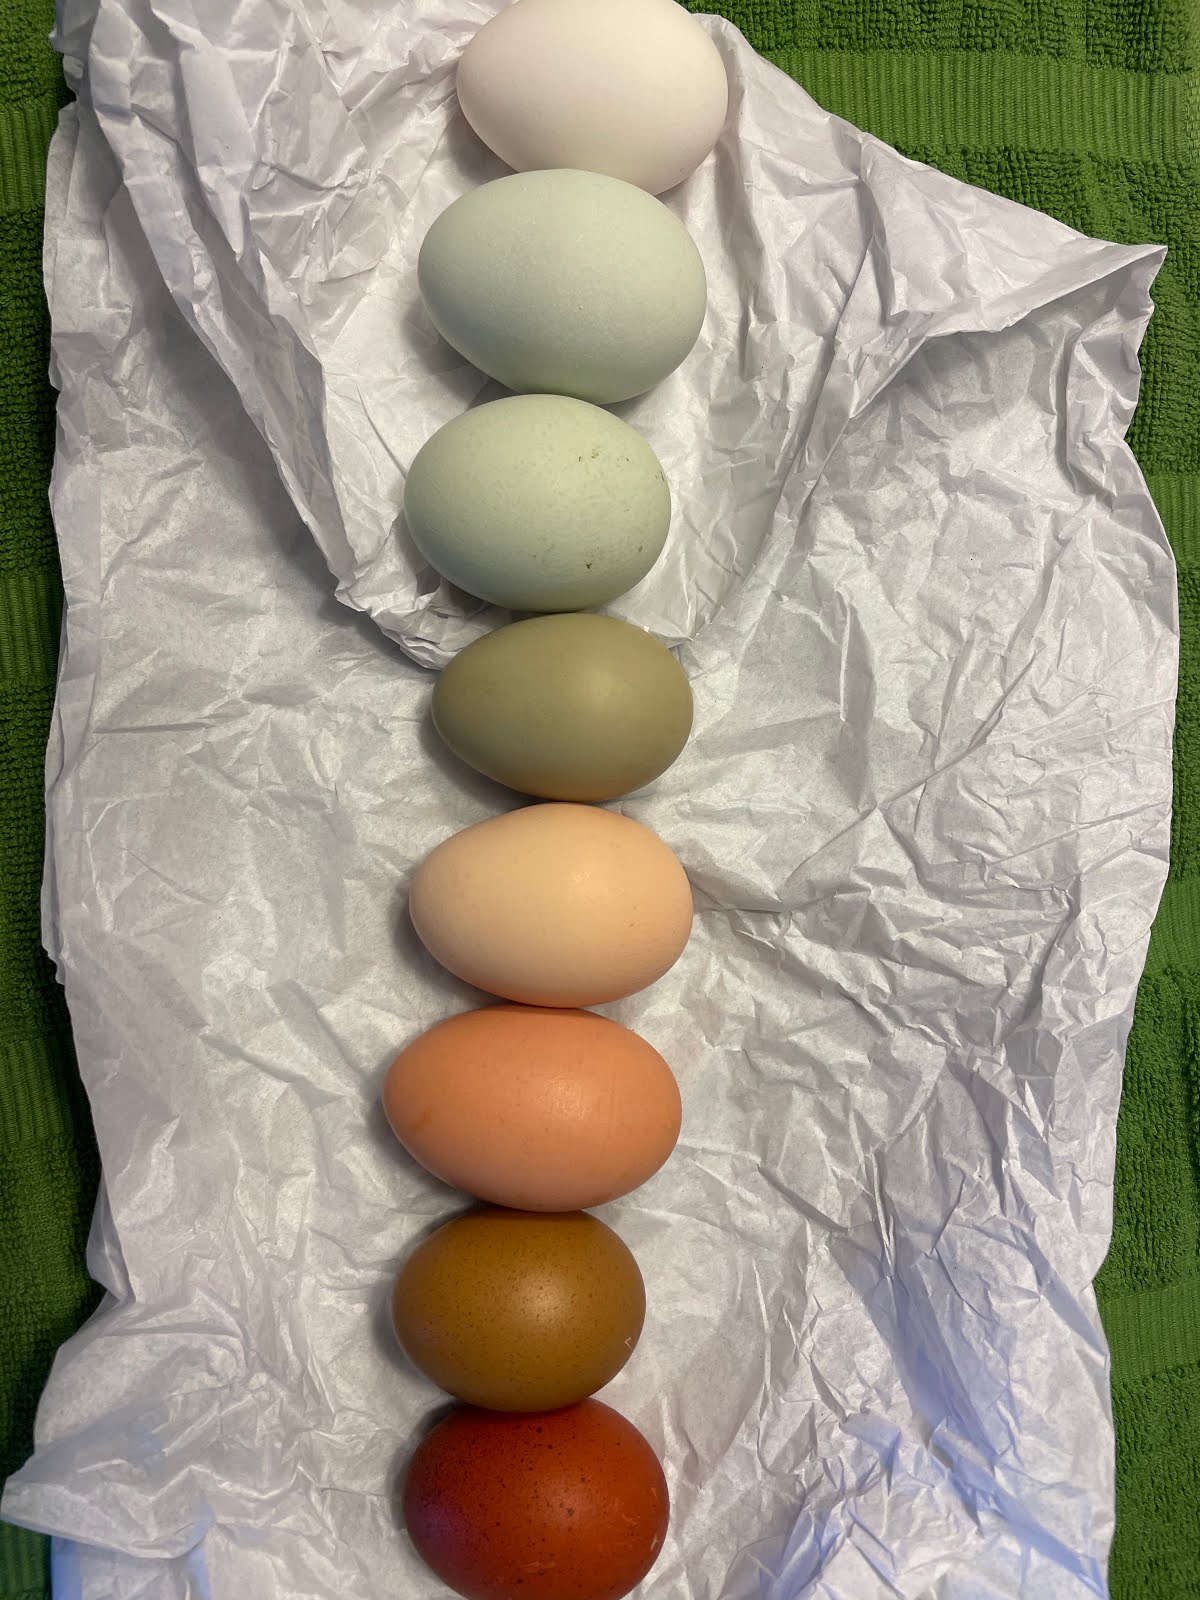 Eggs of the HHS Farm